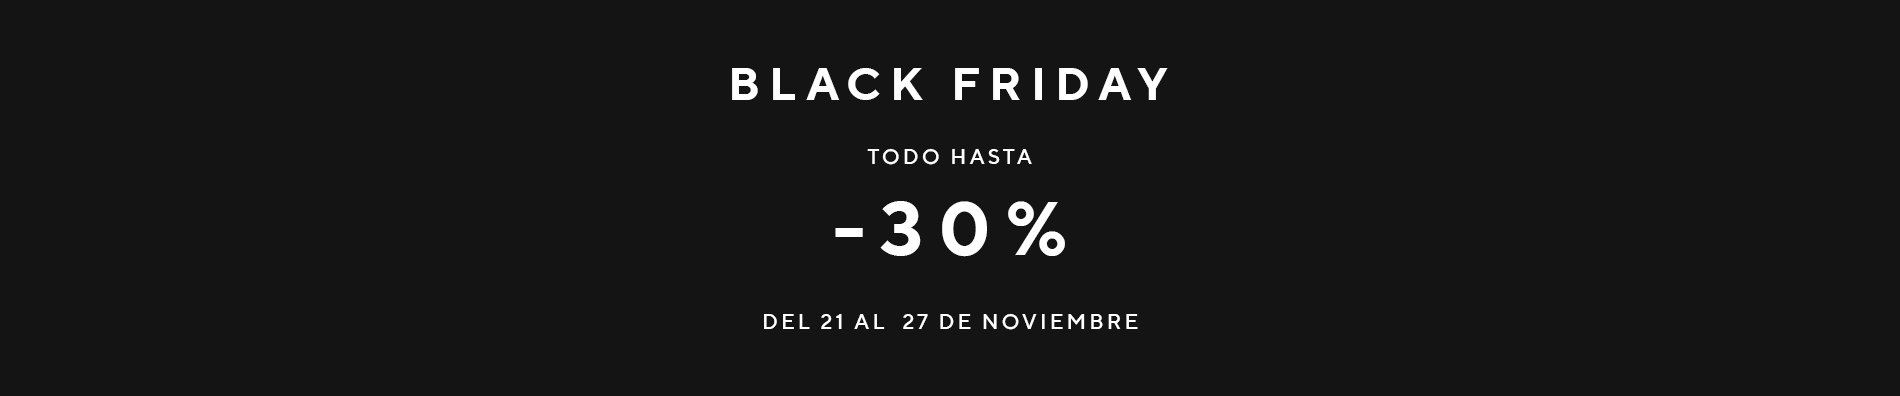 Black Friday everything up to -30% from November 21 to 27